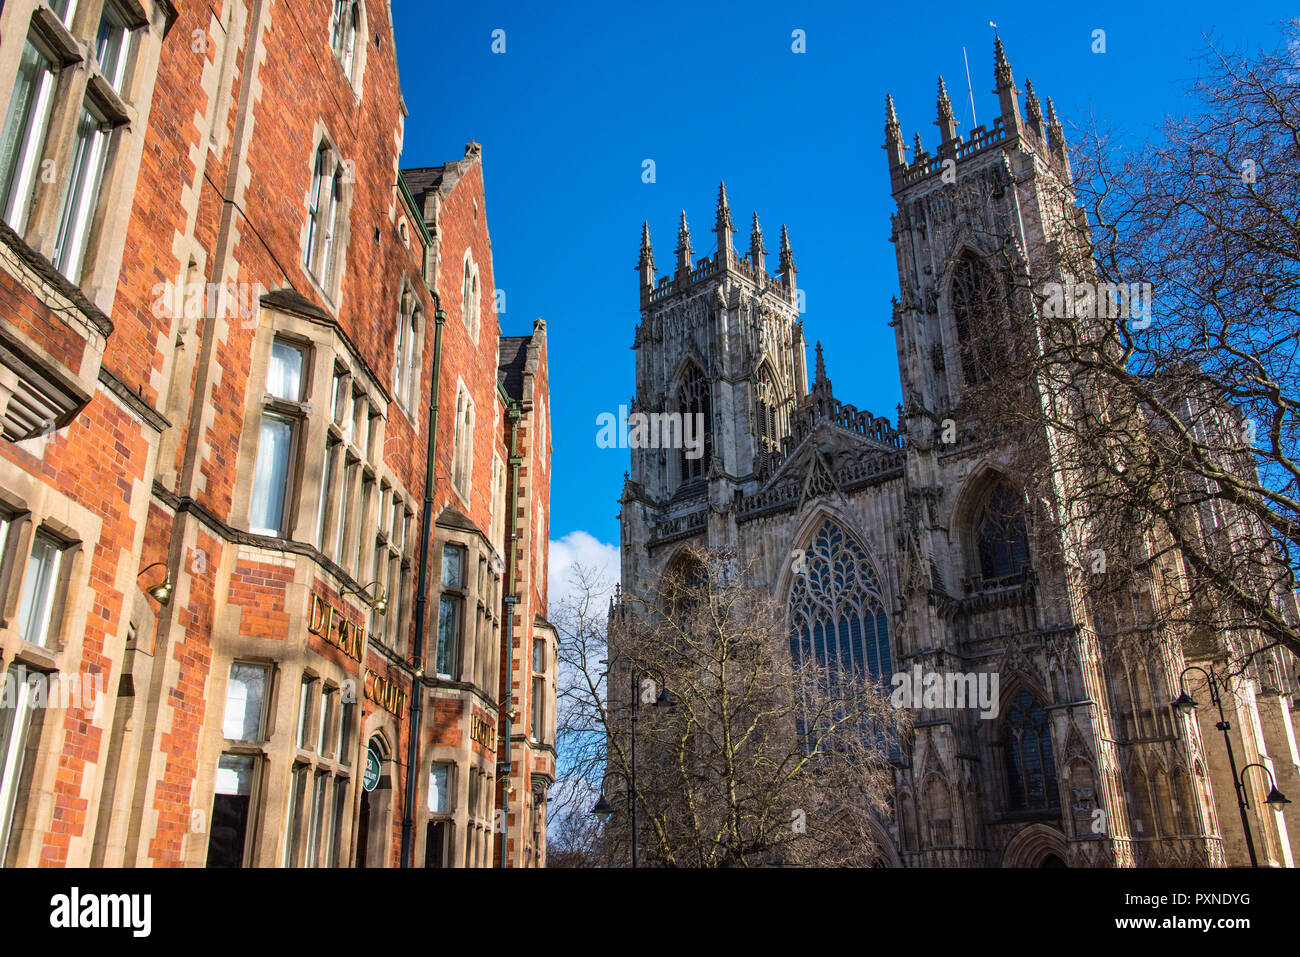 A view towards York Minster, The Cathedral and Metropolitical Church of Saint Peter in York, Yorkshire, England Stock Photo